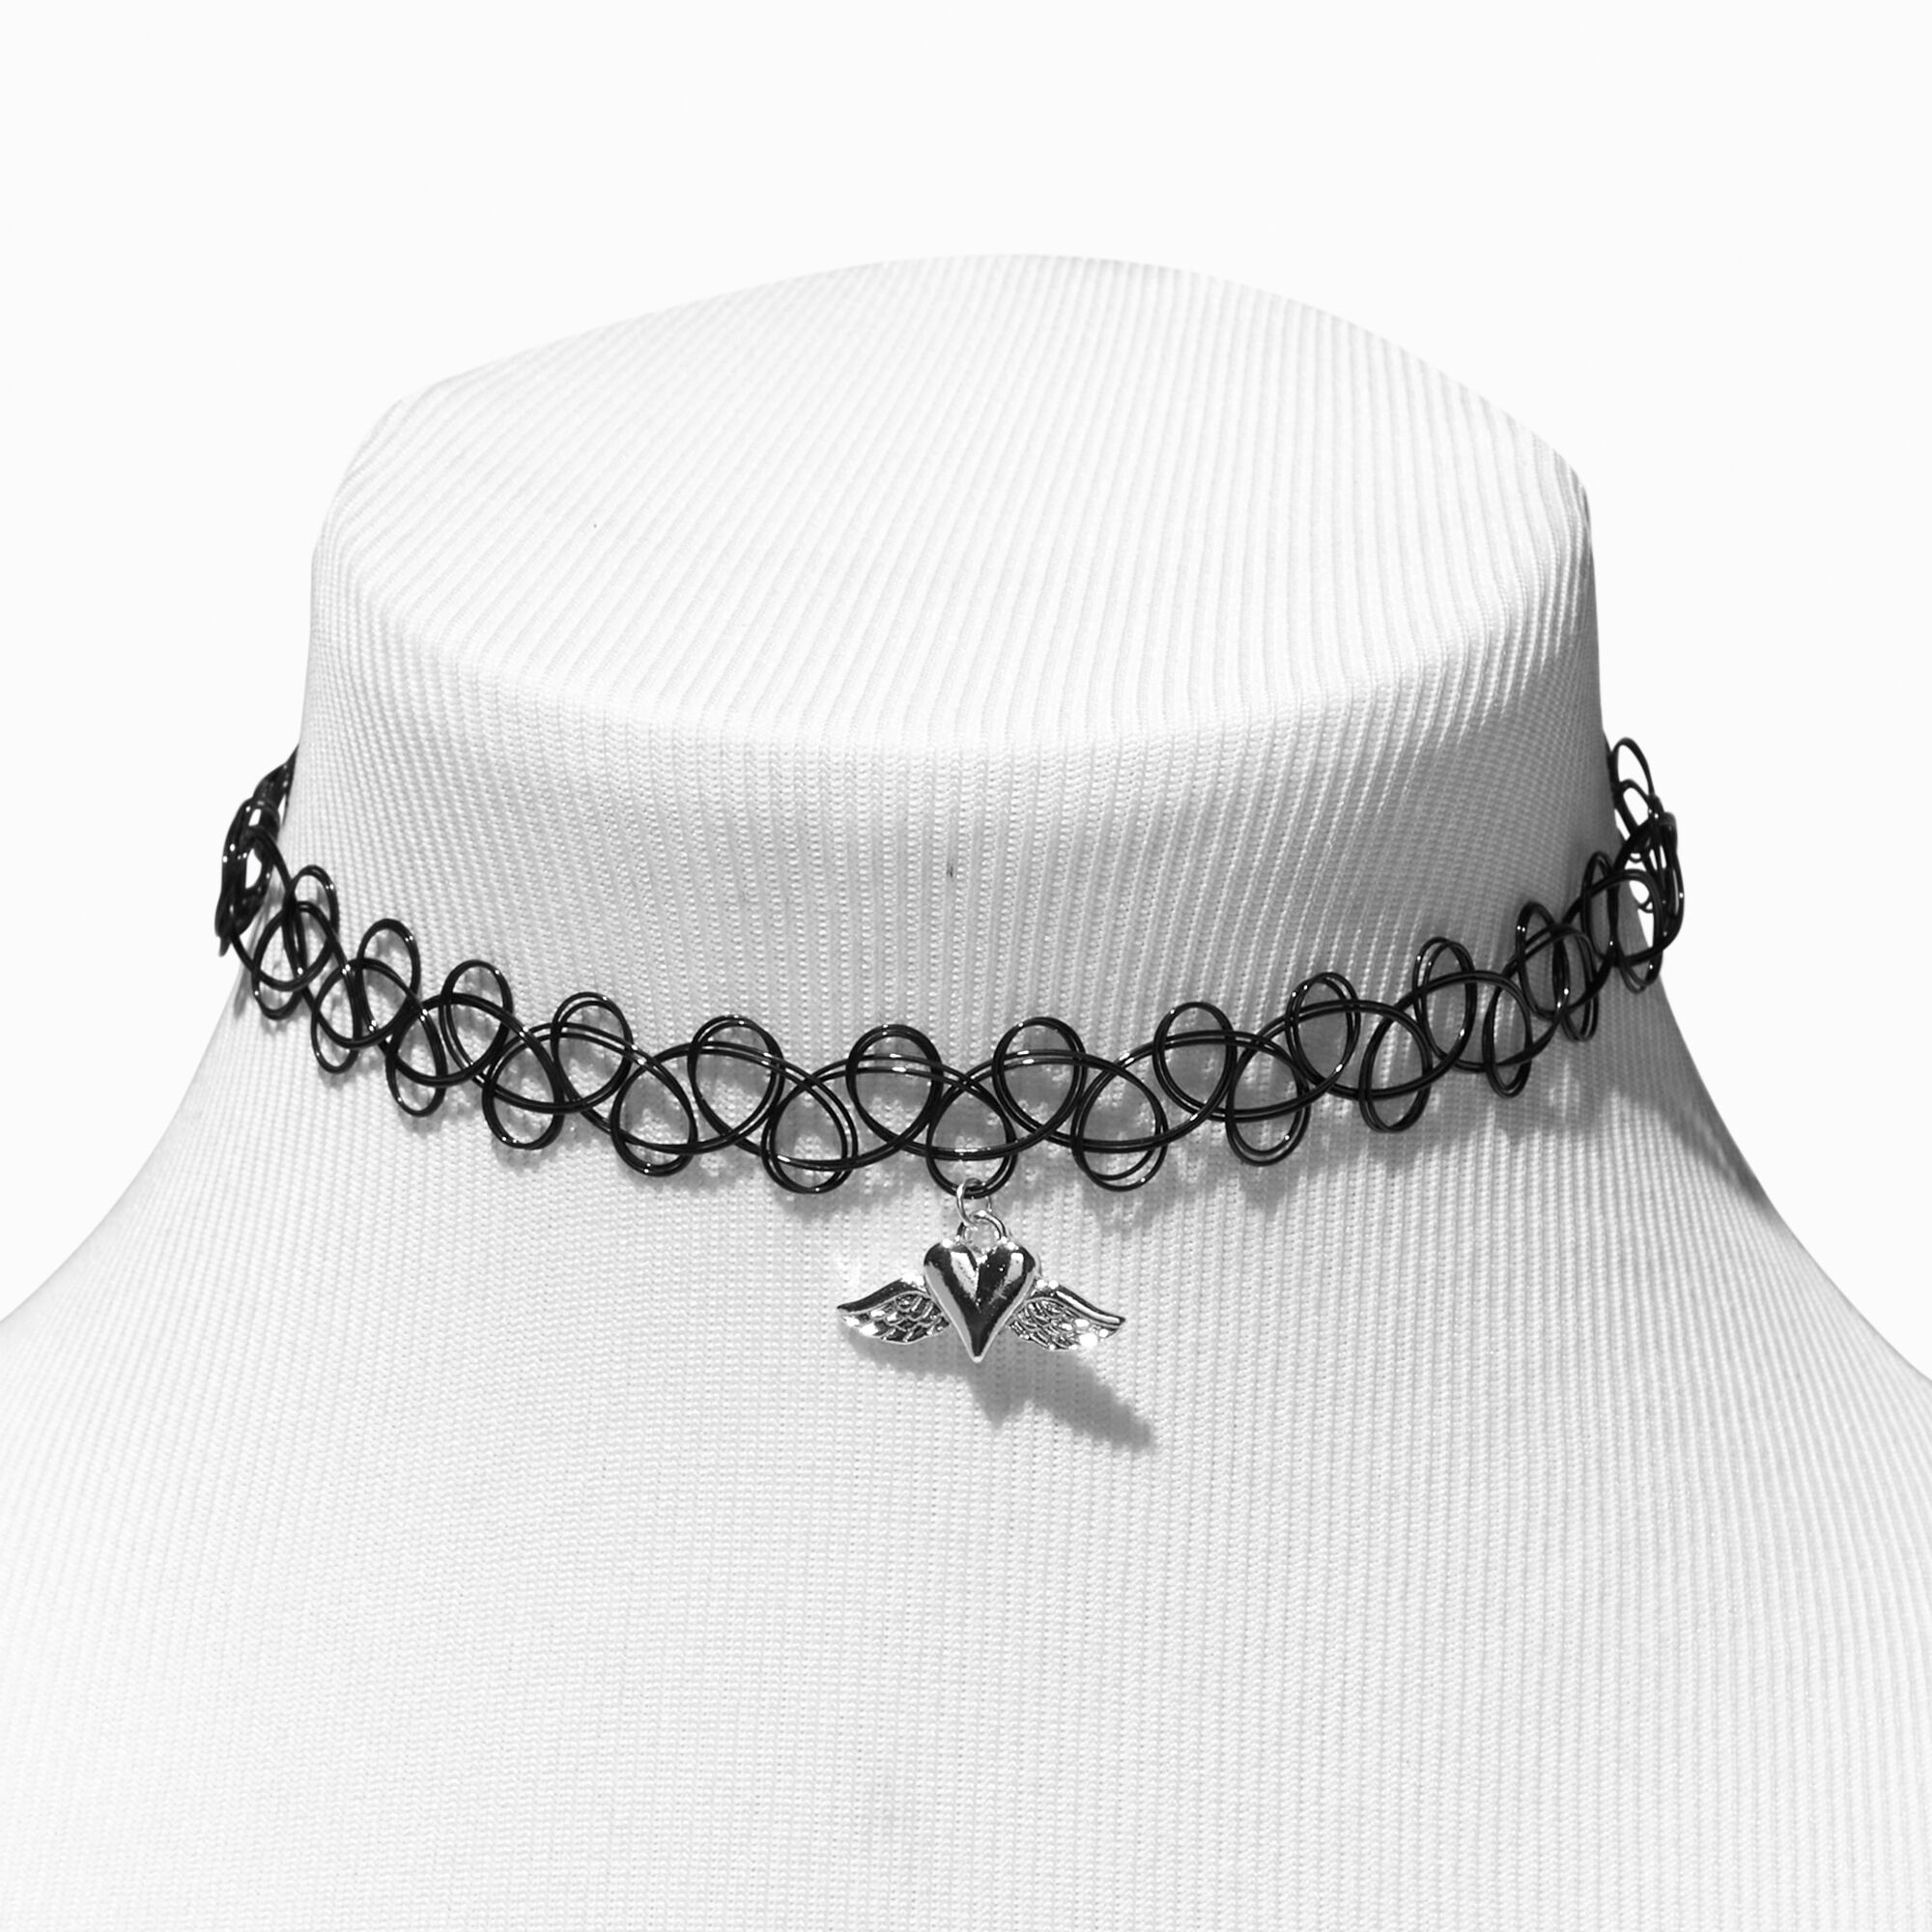 Silver Wing Pendant Black Tattoo Choker Necklace | Icing US